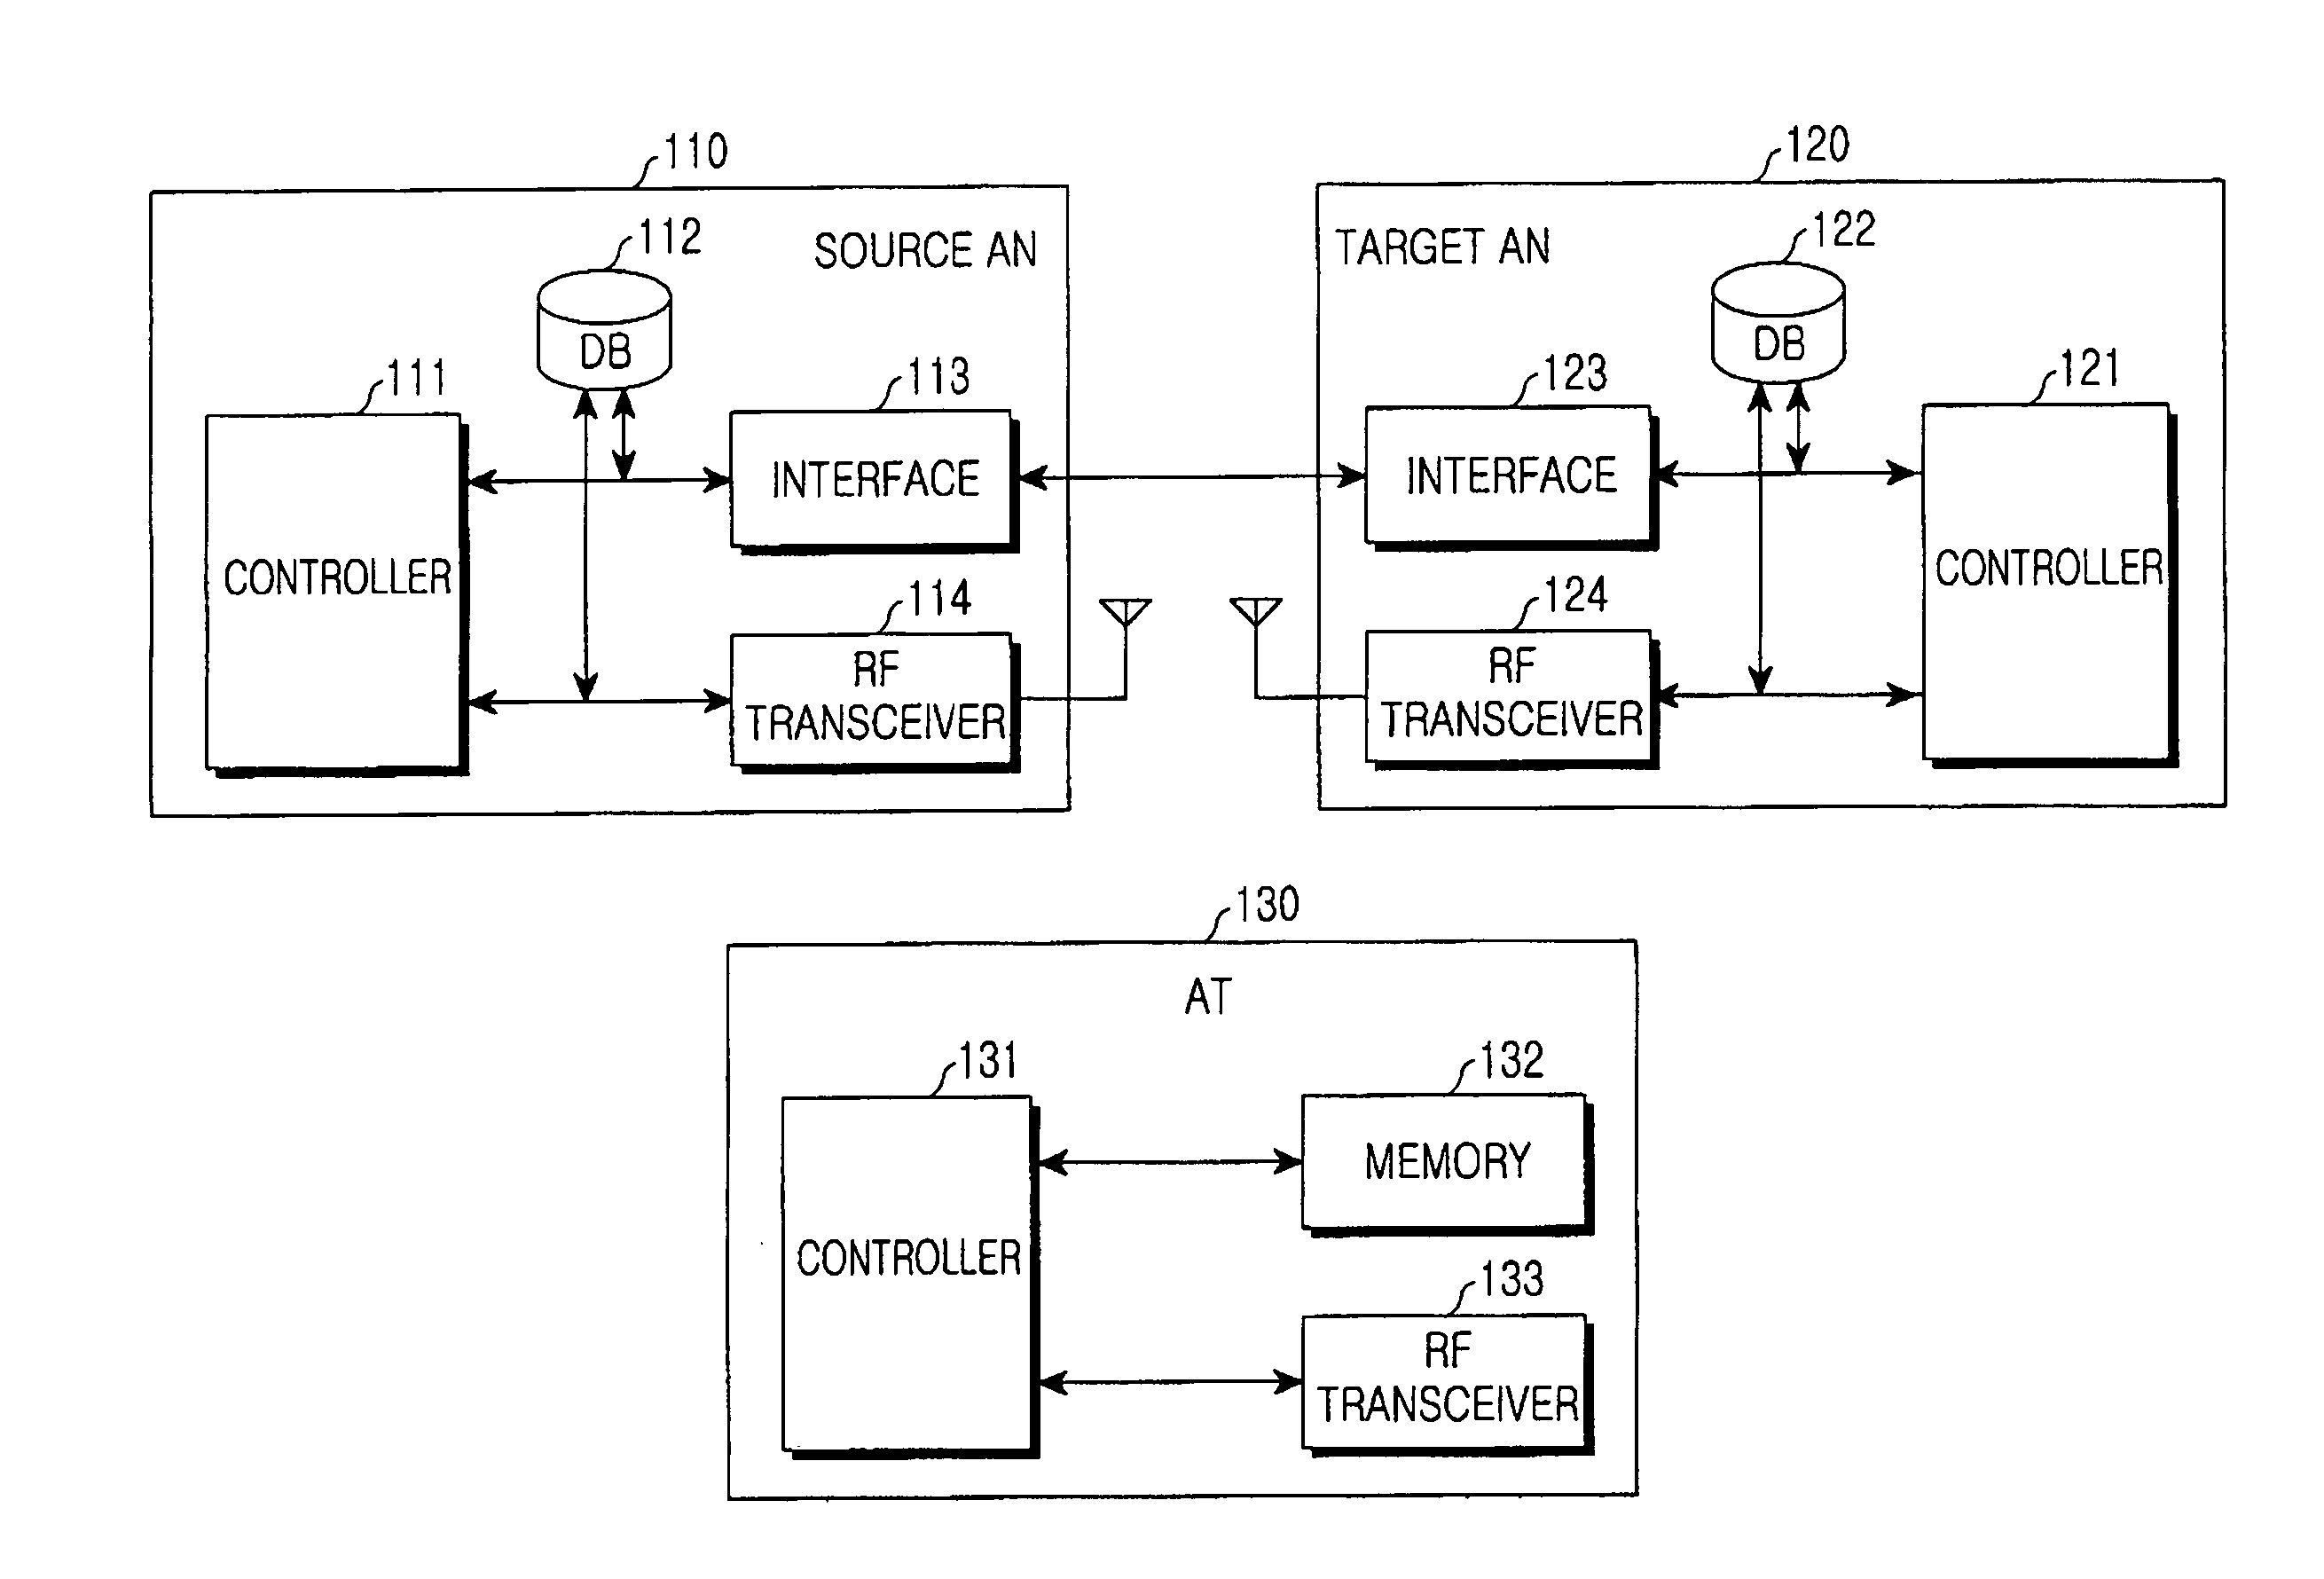 Apparatus and method for triggering session re-negotiation between access network and access terminal in a high rate packet data system